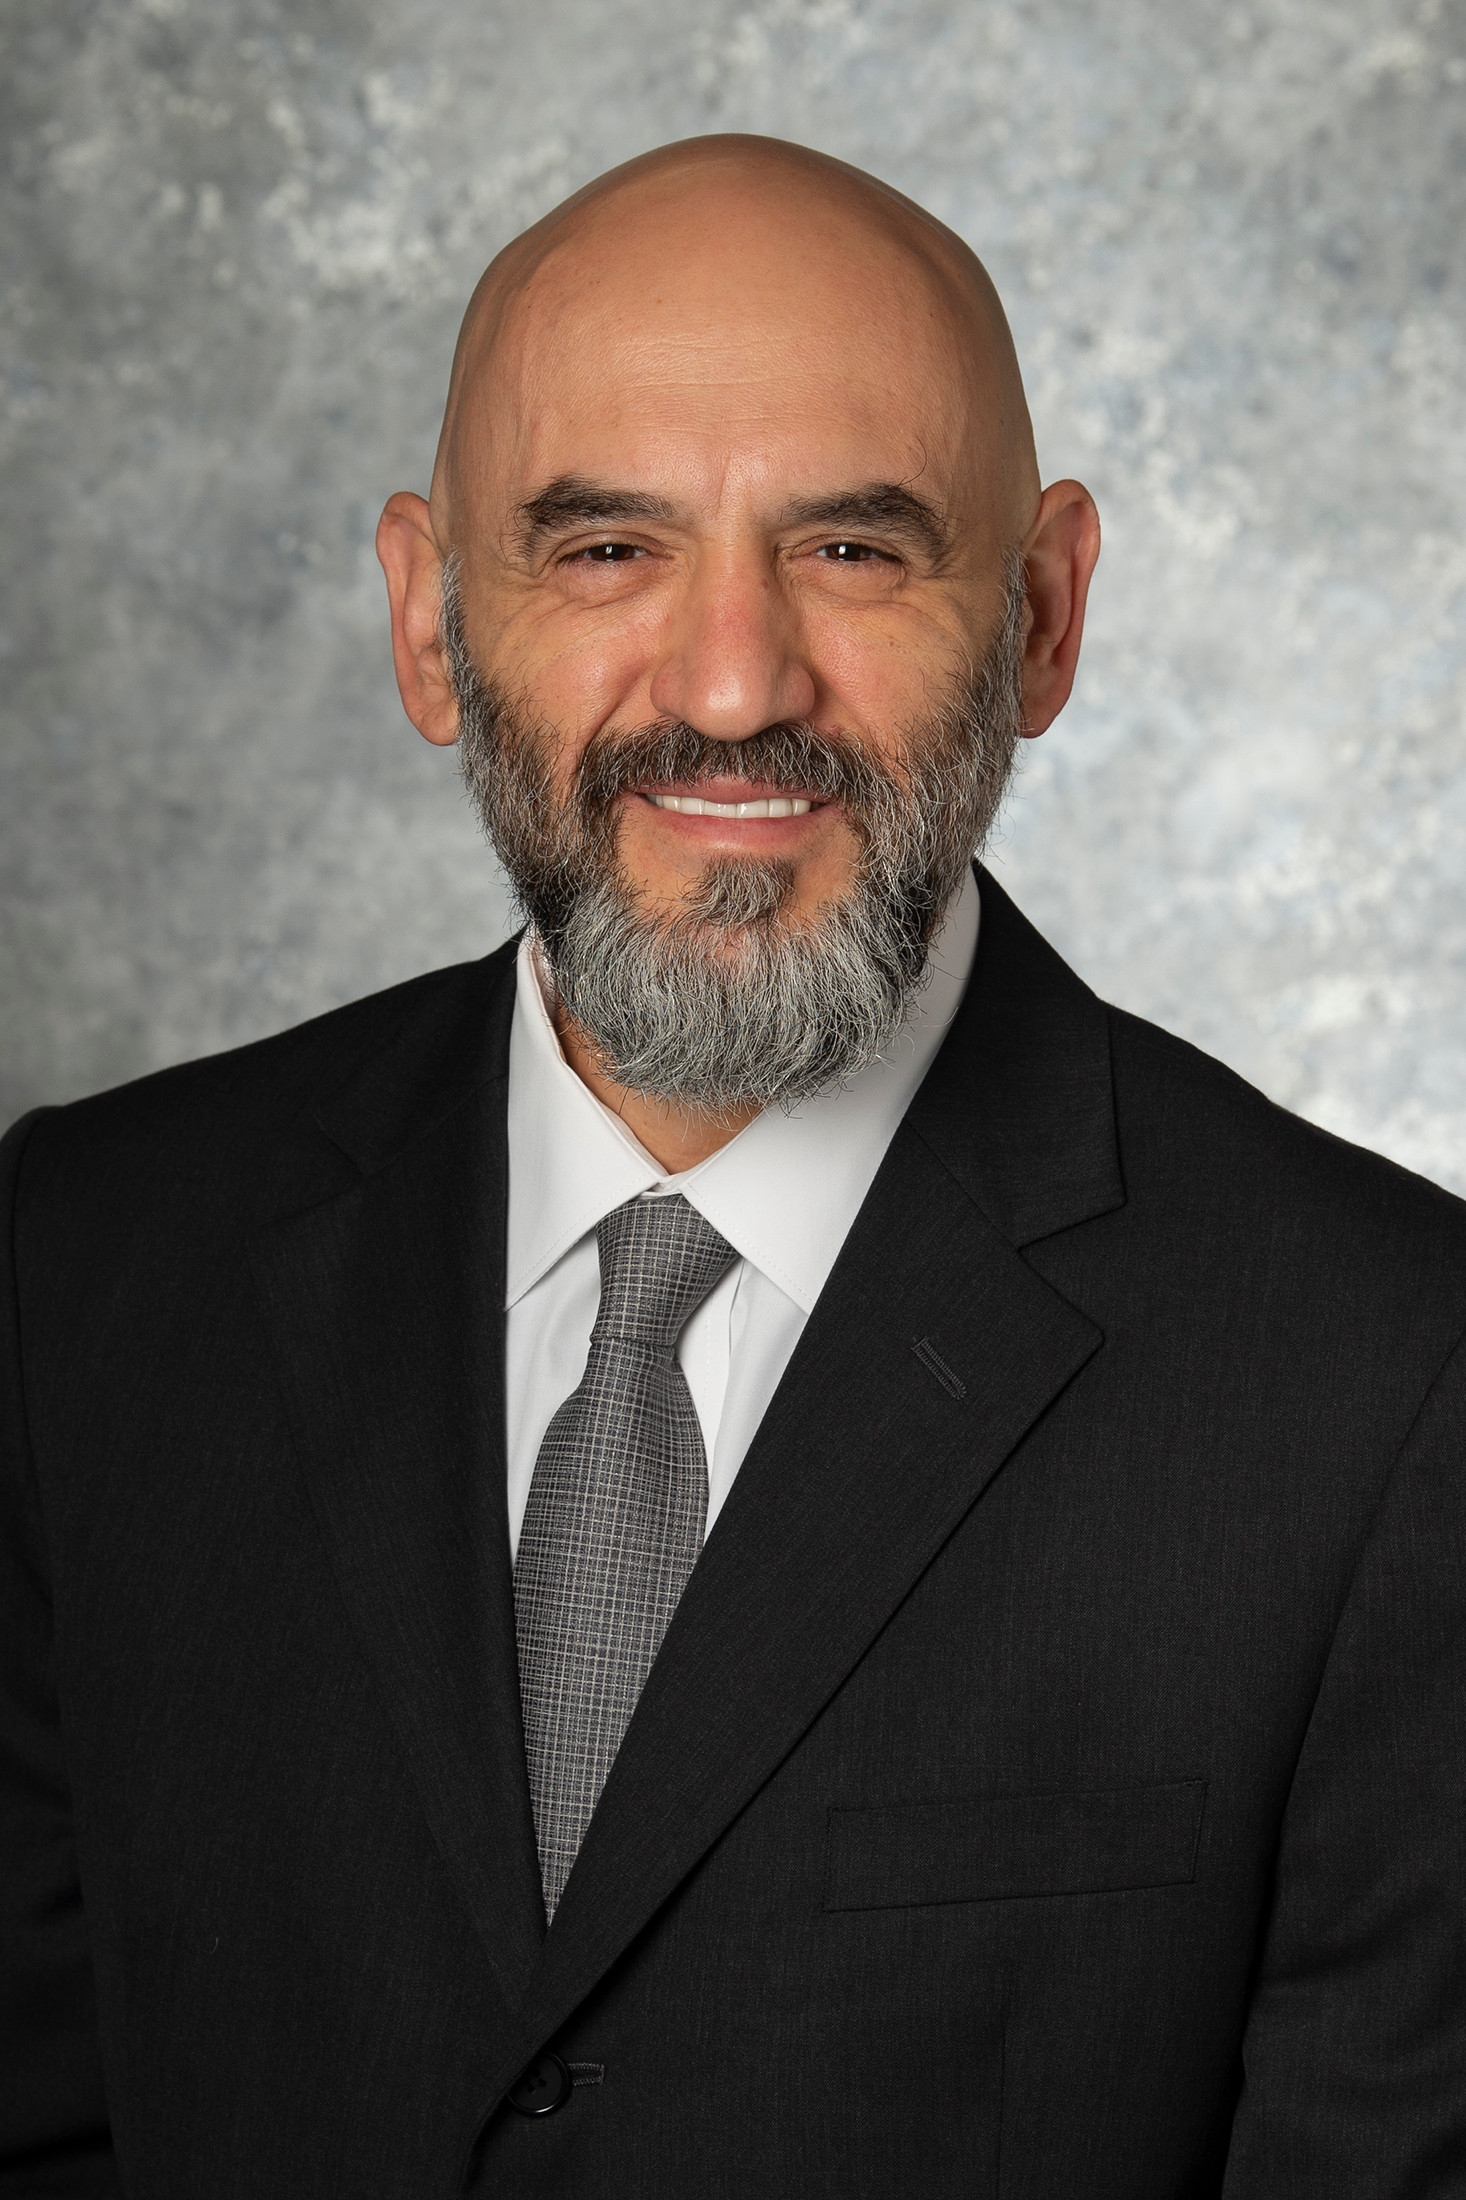 A headshot of Halit Uster, a member of the Lyle School of Engineering Faculty.